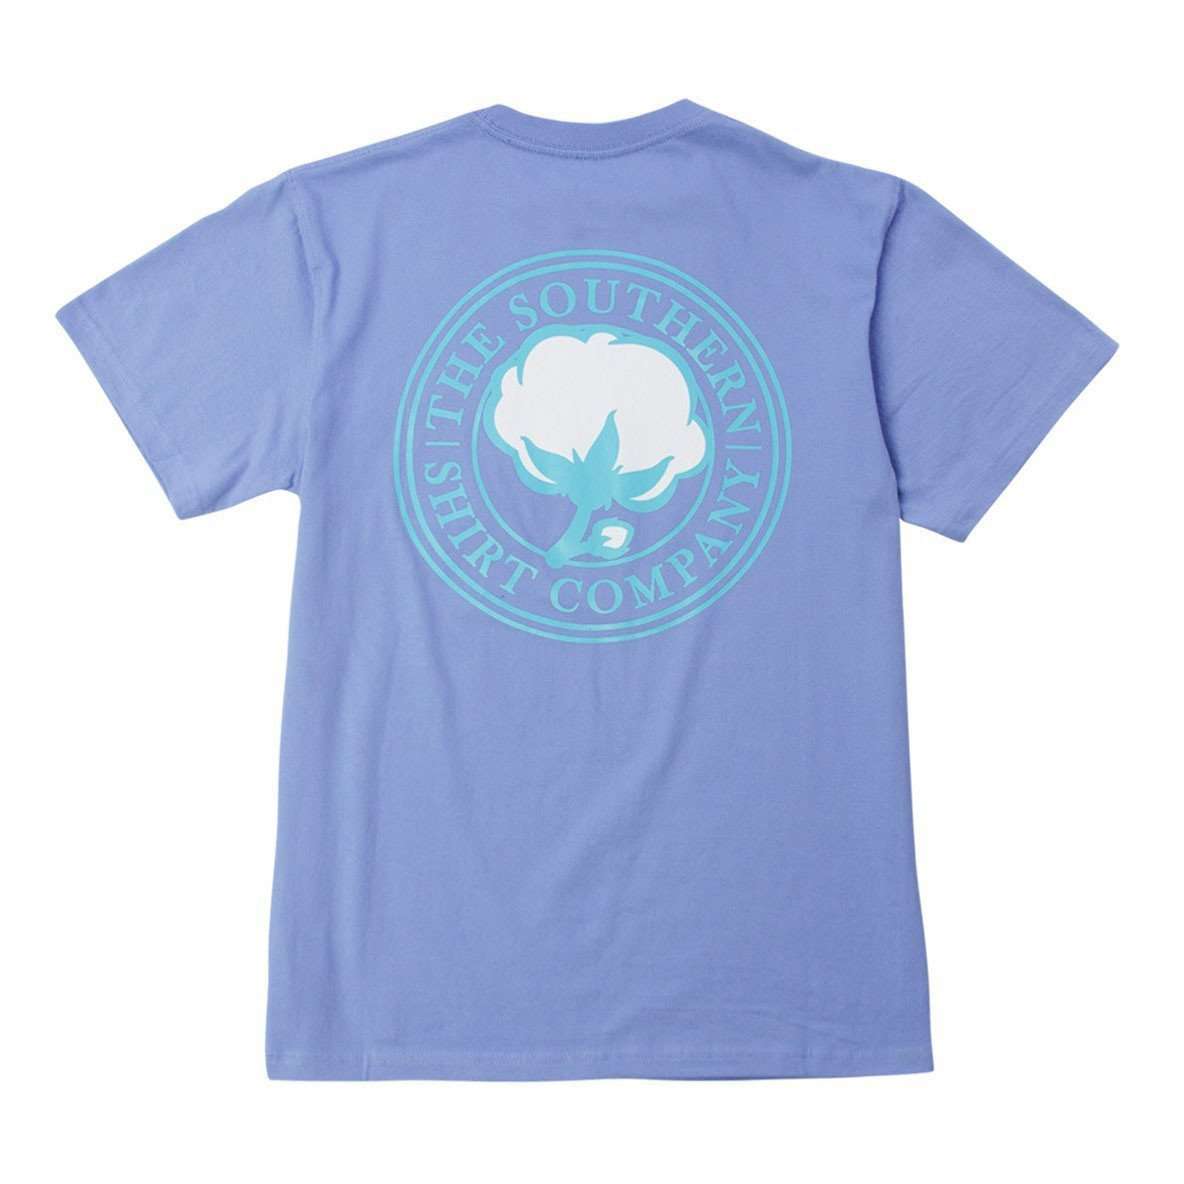 Signature Logo Tee in Cornflower Blue by The Southern Shirt Co. - Country Club Prep